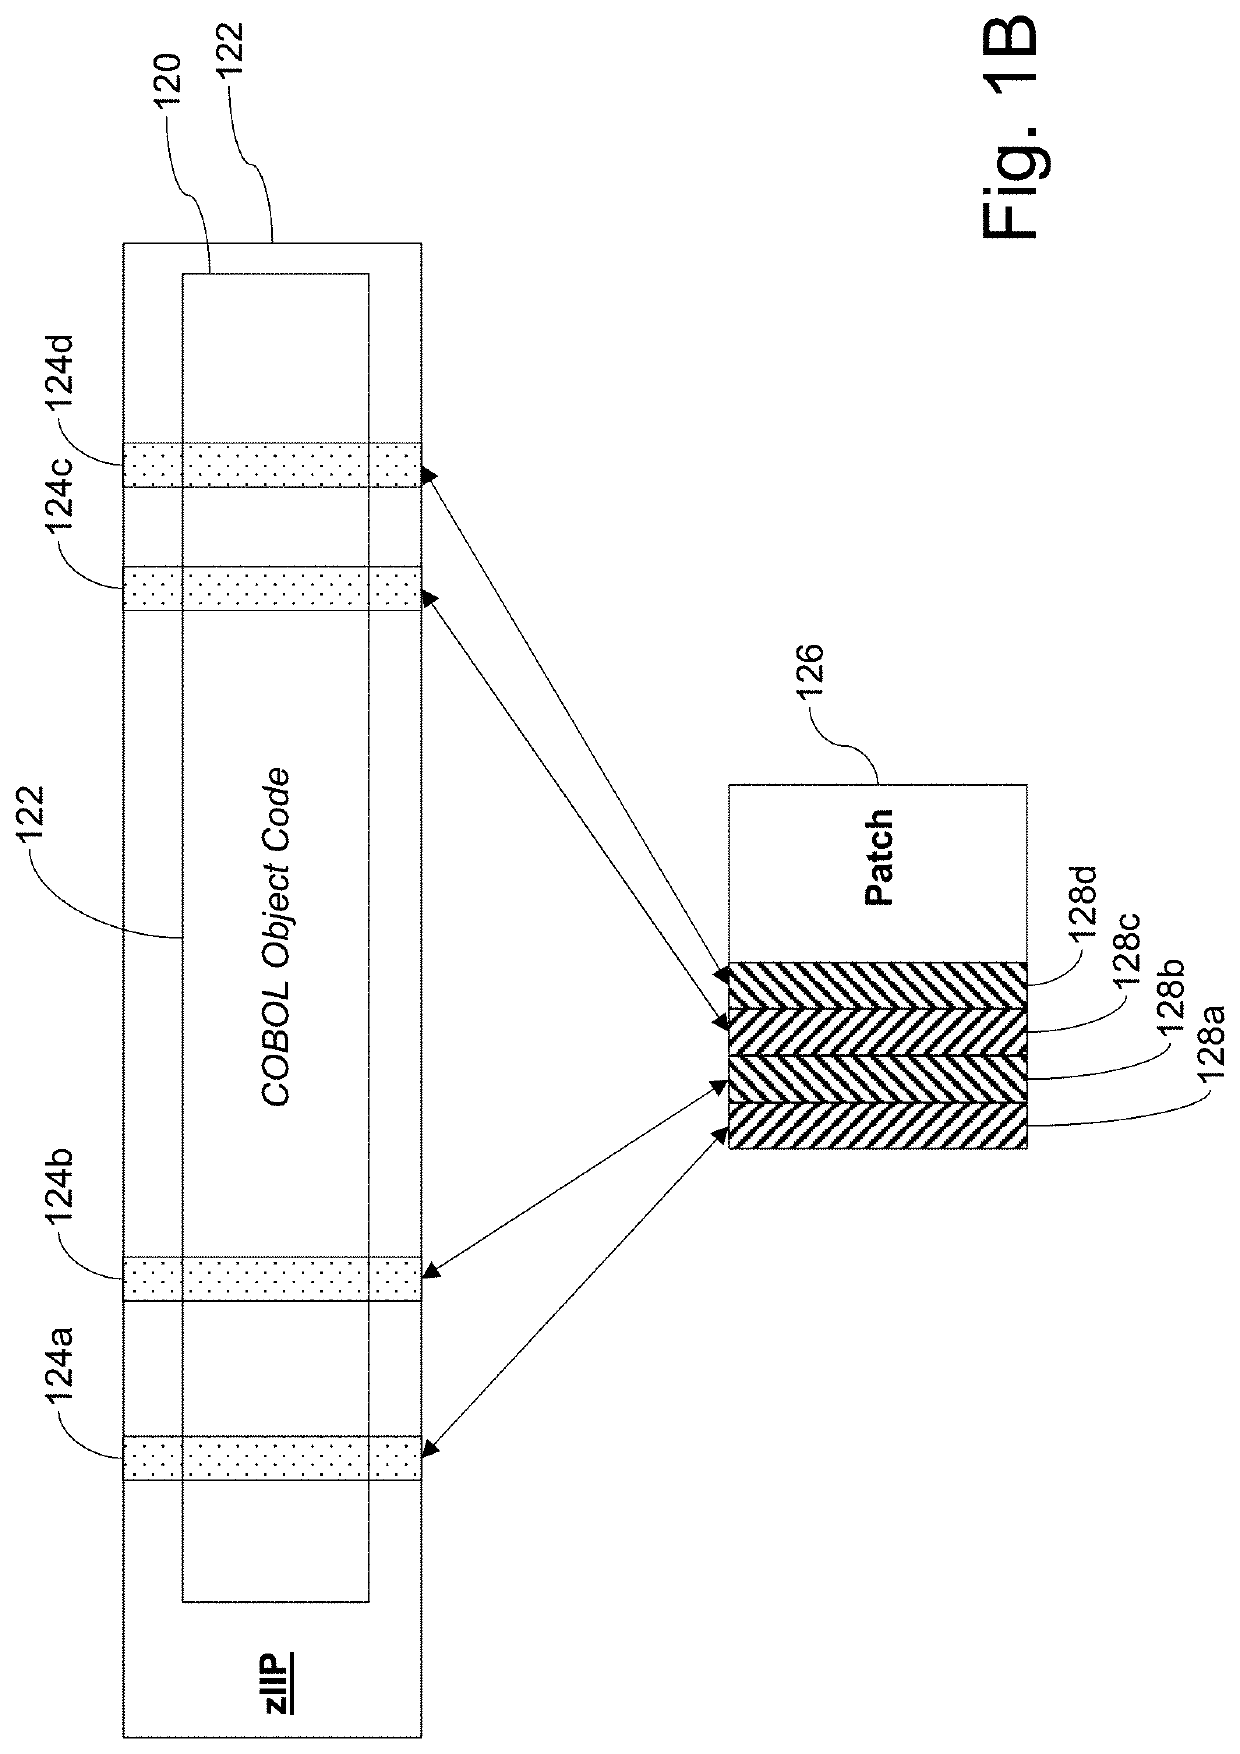 Systems and/or methods for error-free implementation of non-java program code on special purpose processors